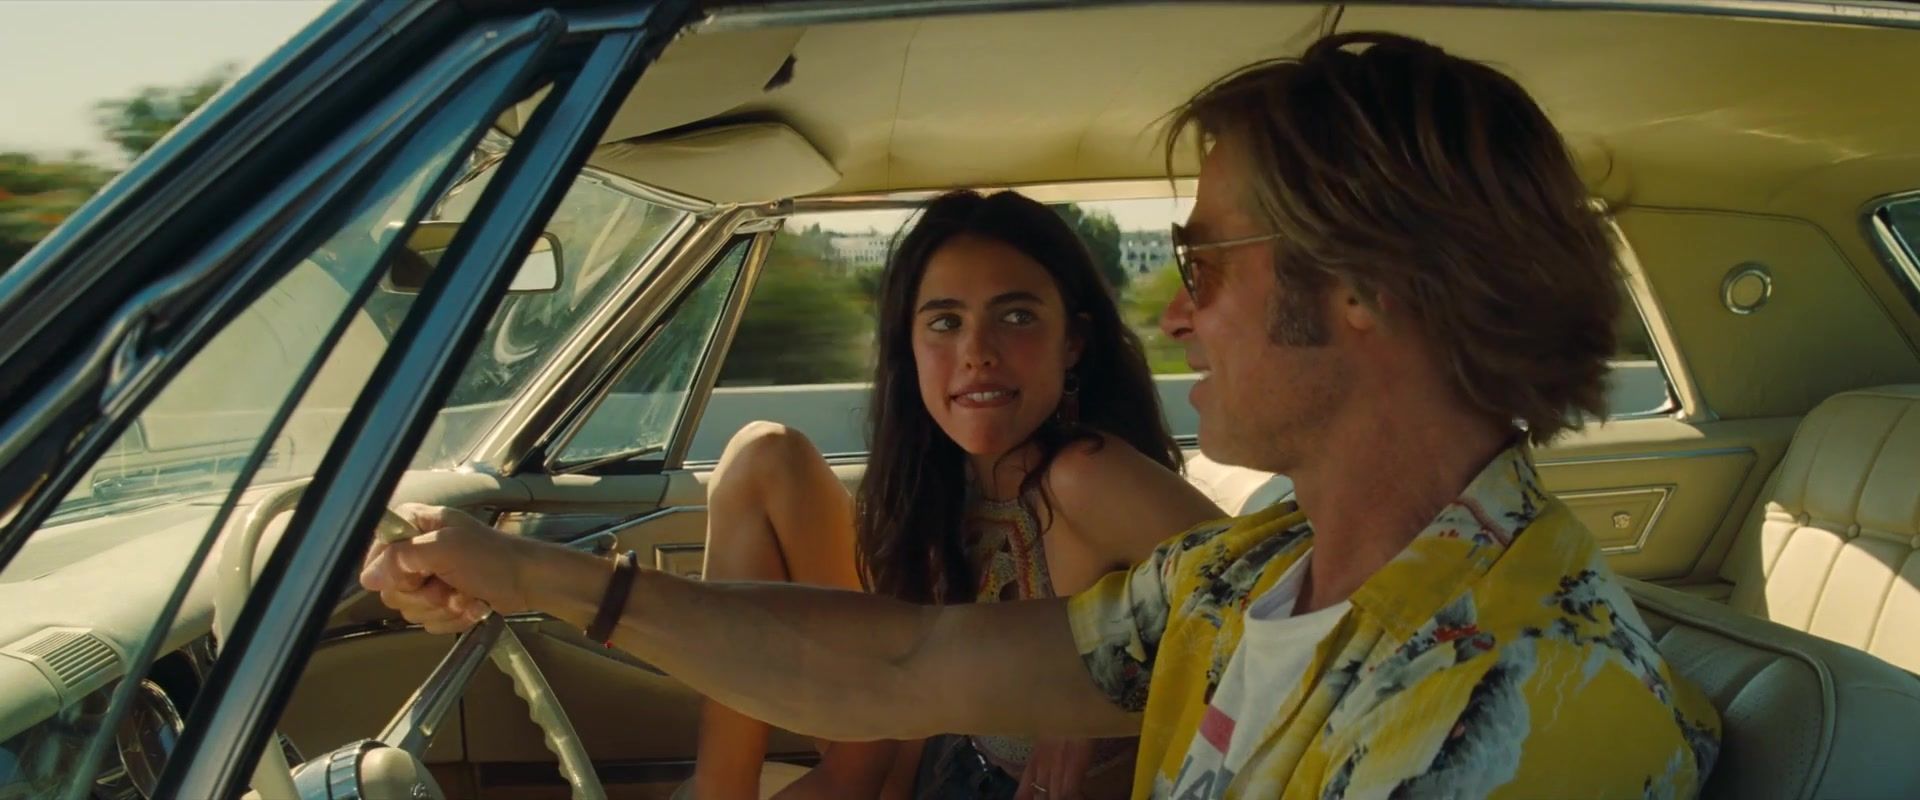 TeamSkeet Sexy Dakota Fanning, Margaret Qualley naked- Once Upon A Time In Hollywood (2019) Bondagesex